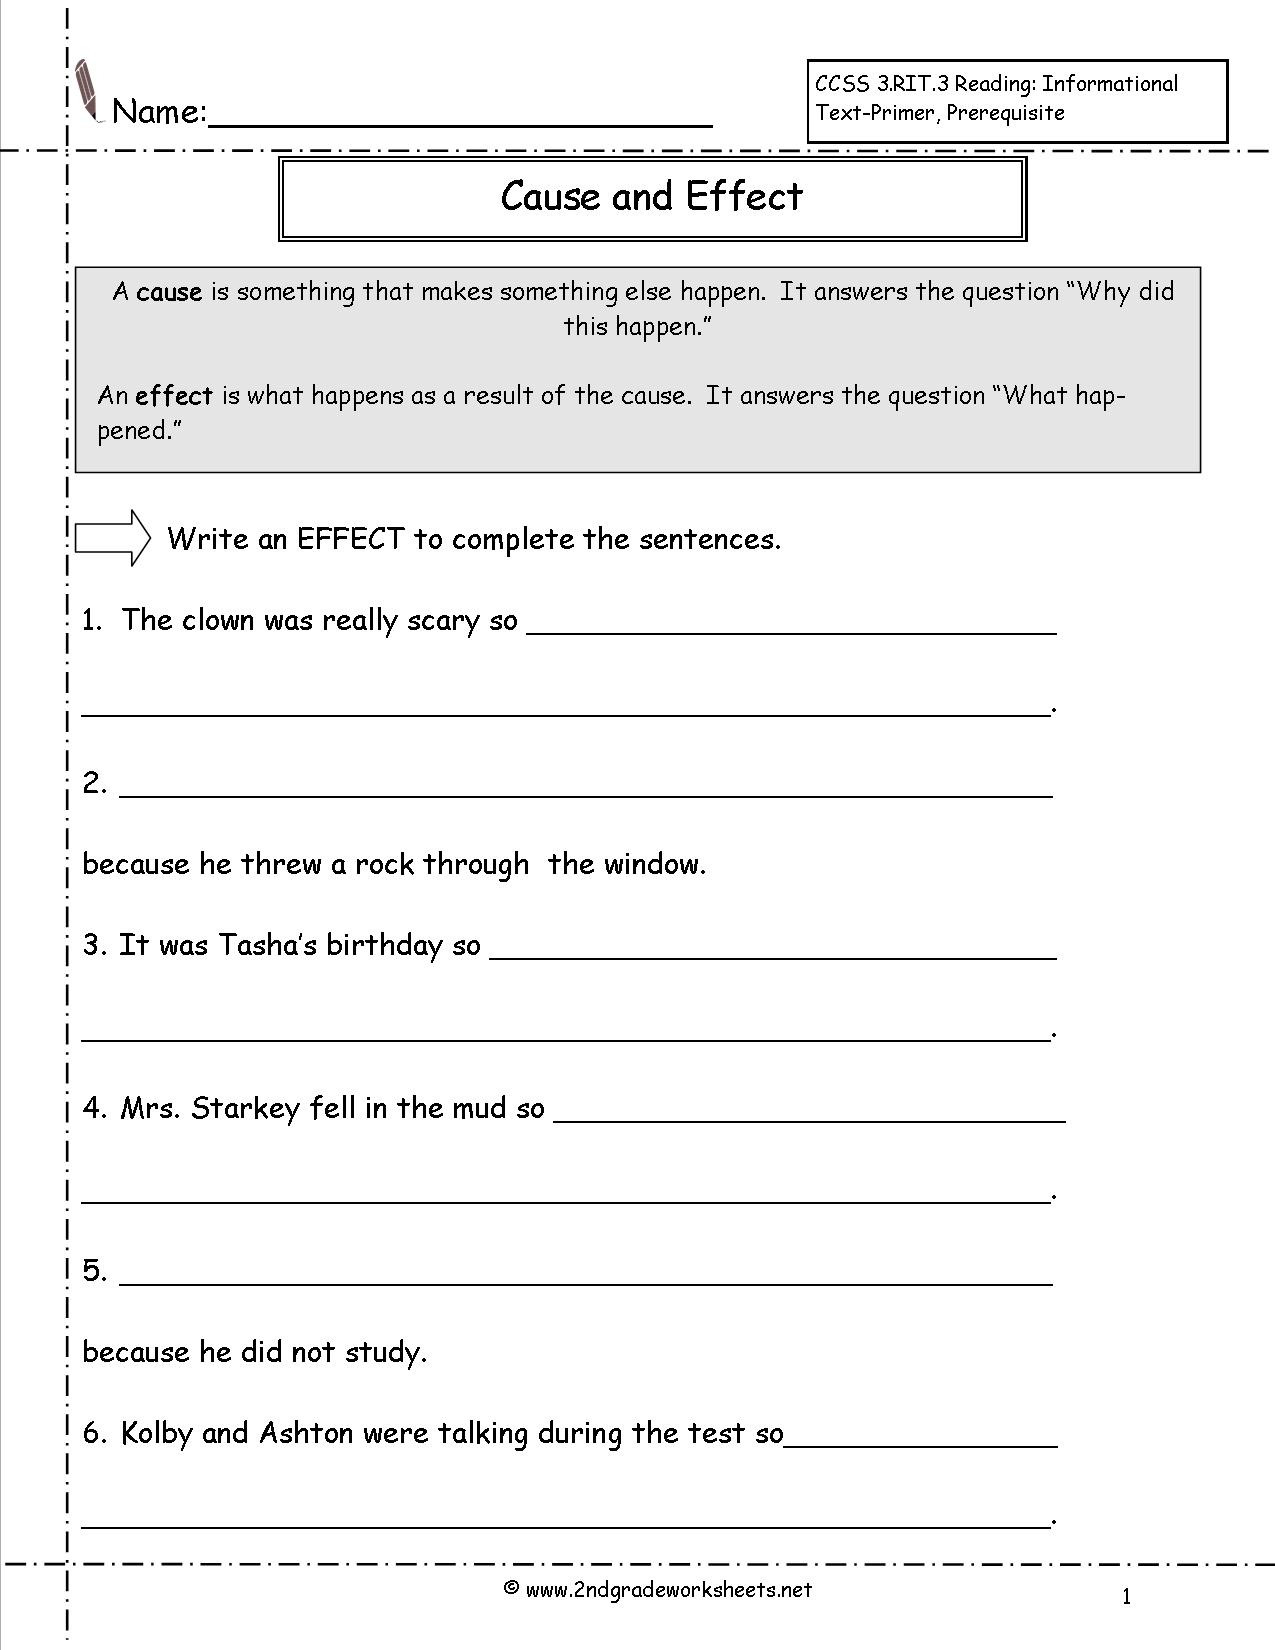 what-is-cause-and-effect-worksheets-99worksheets